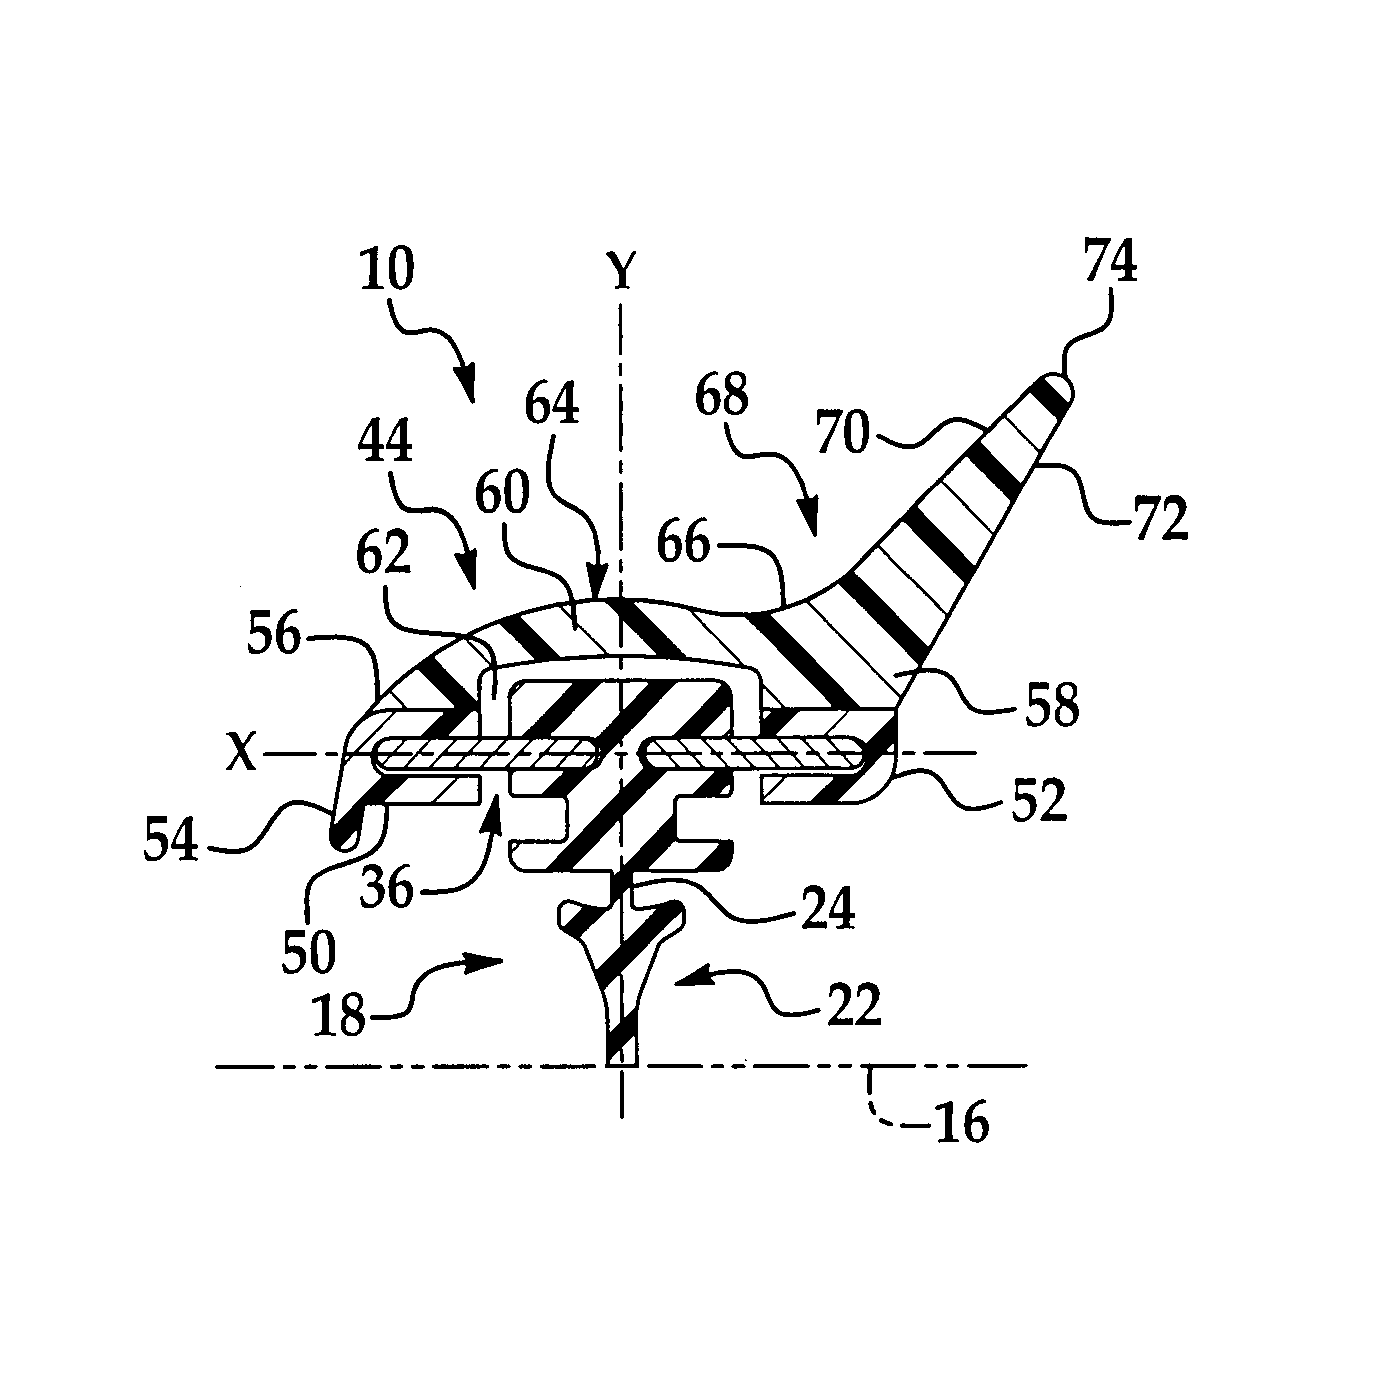 Windshield wiper assembly having an optimized airfoil